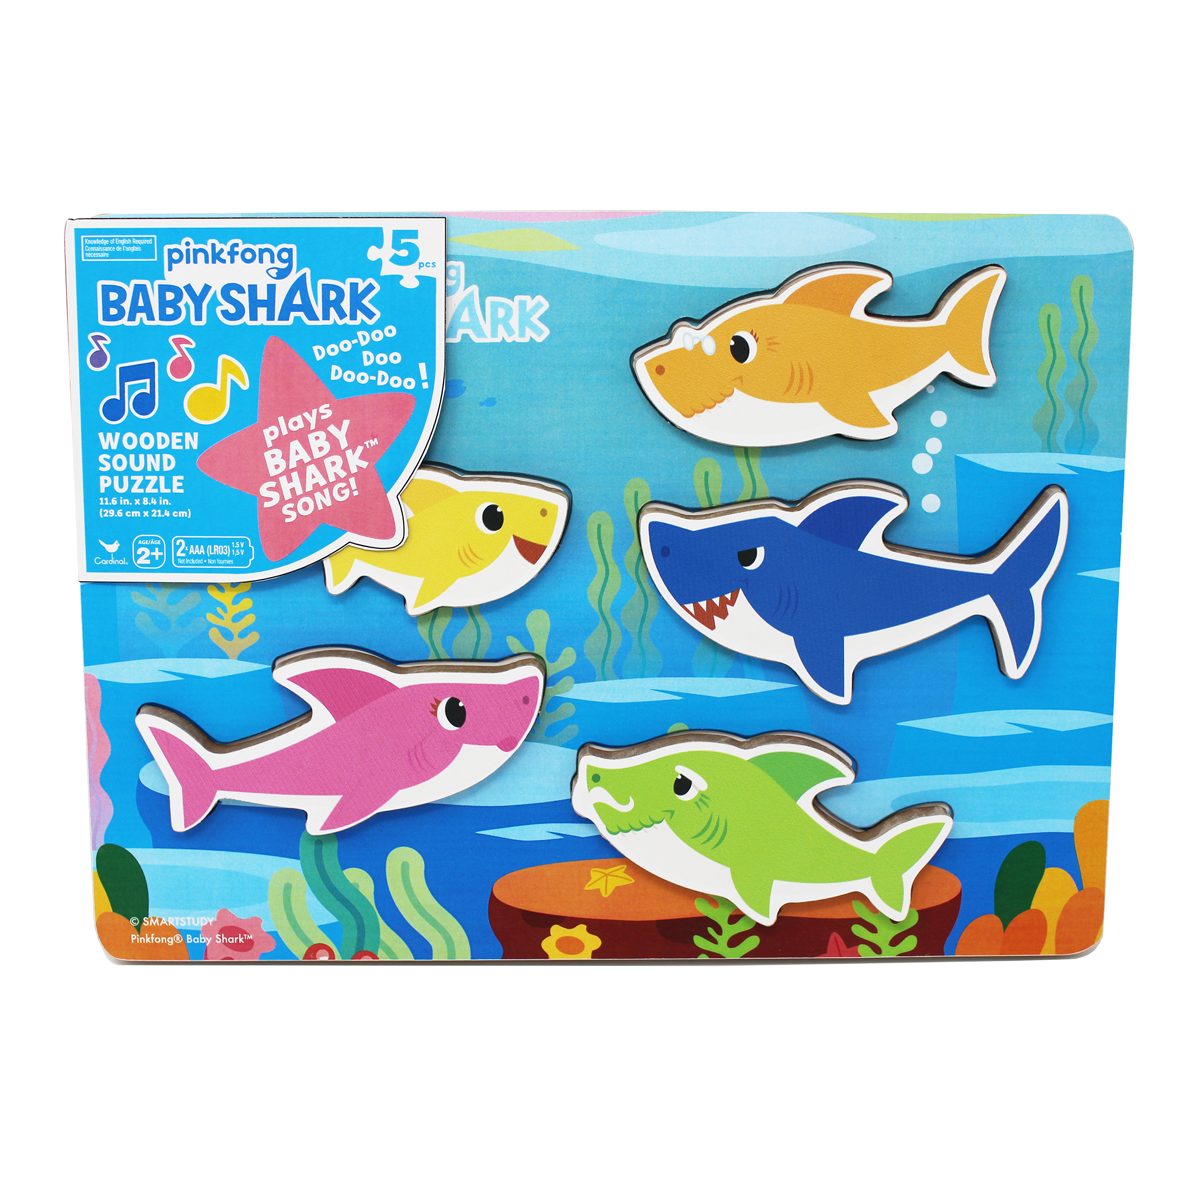 Baby Shark Chunky Wooden Sound Puzzle Plays Baby Shark Song Brand New and Sealed 